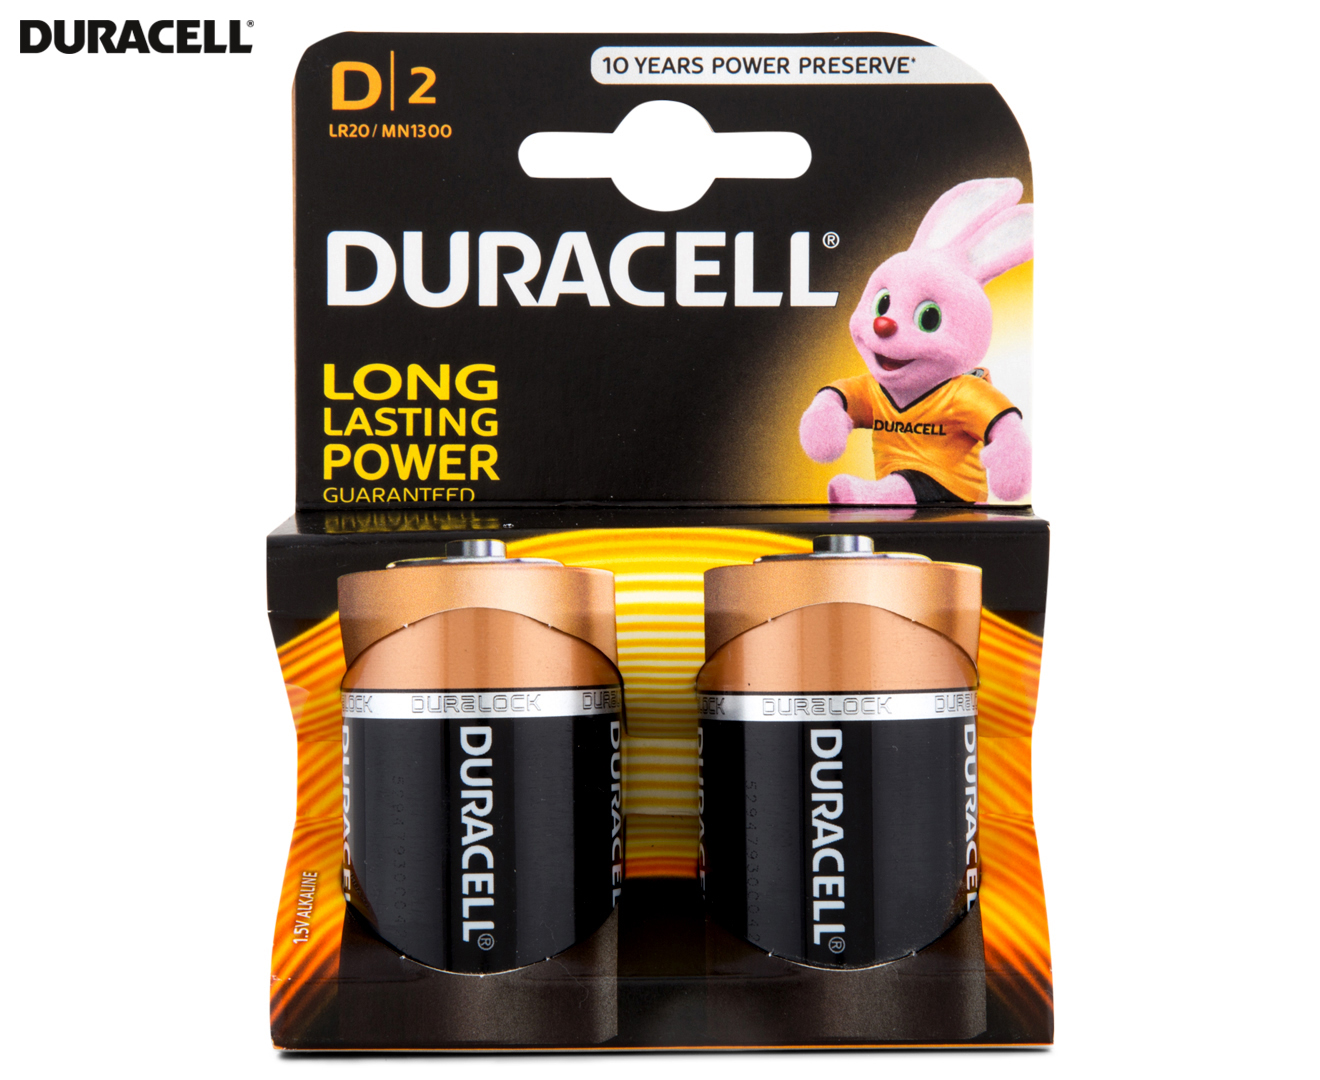 duracell rechargeable batteries guarantee